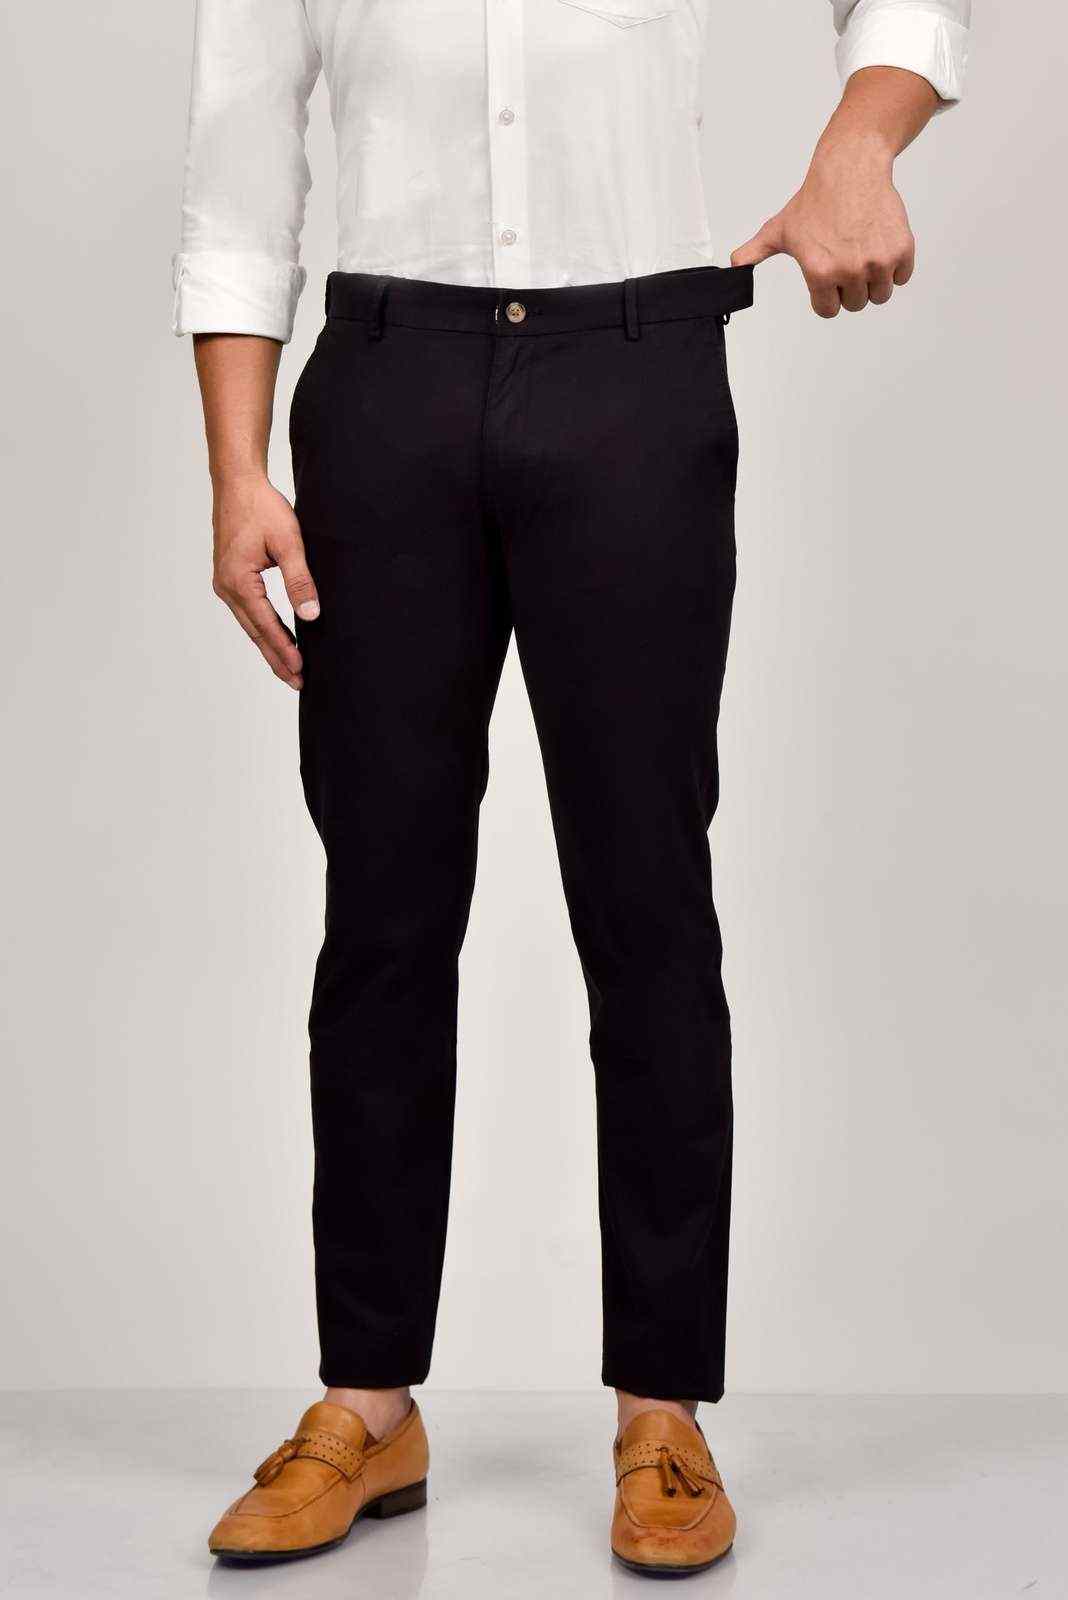 Black Cotton Trouser house-of-united